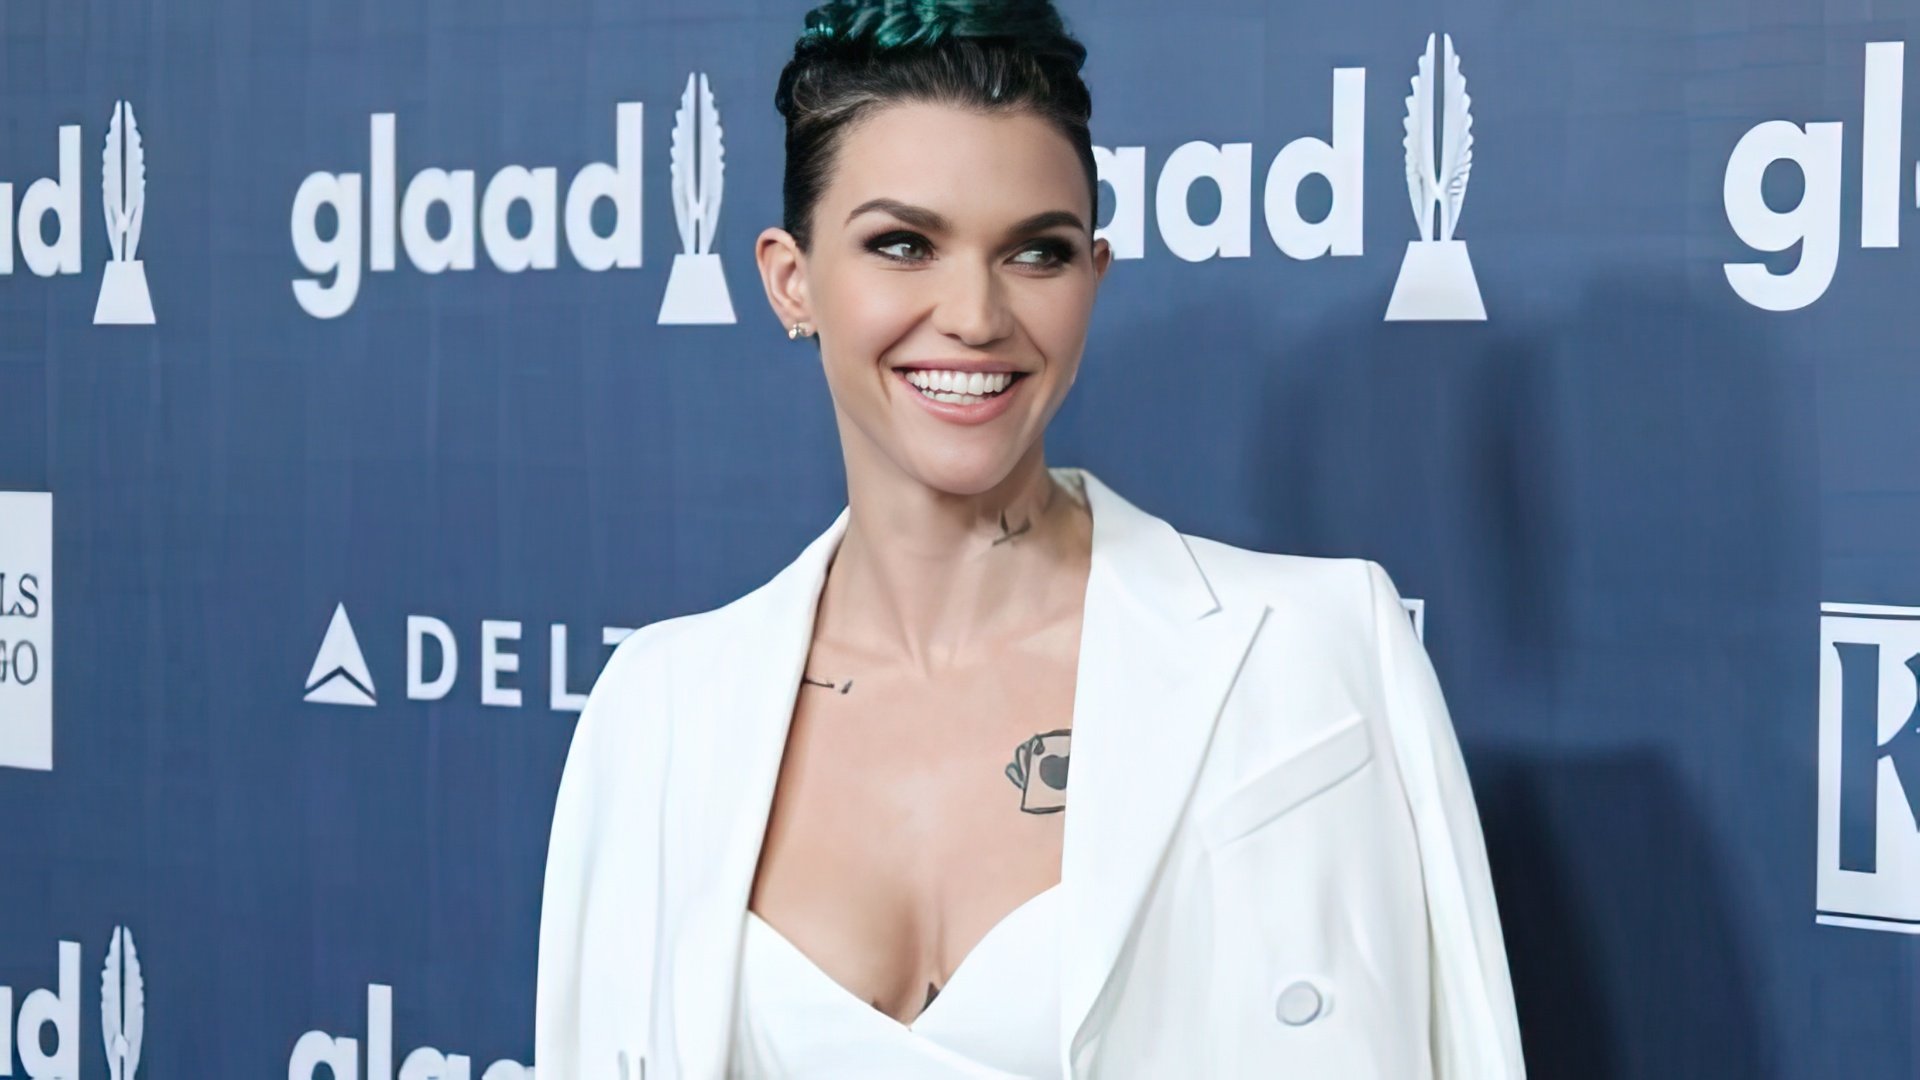 Ruby Rose at the premiere of the Meg